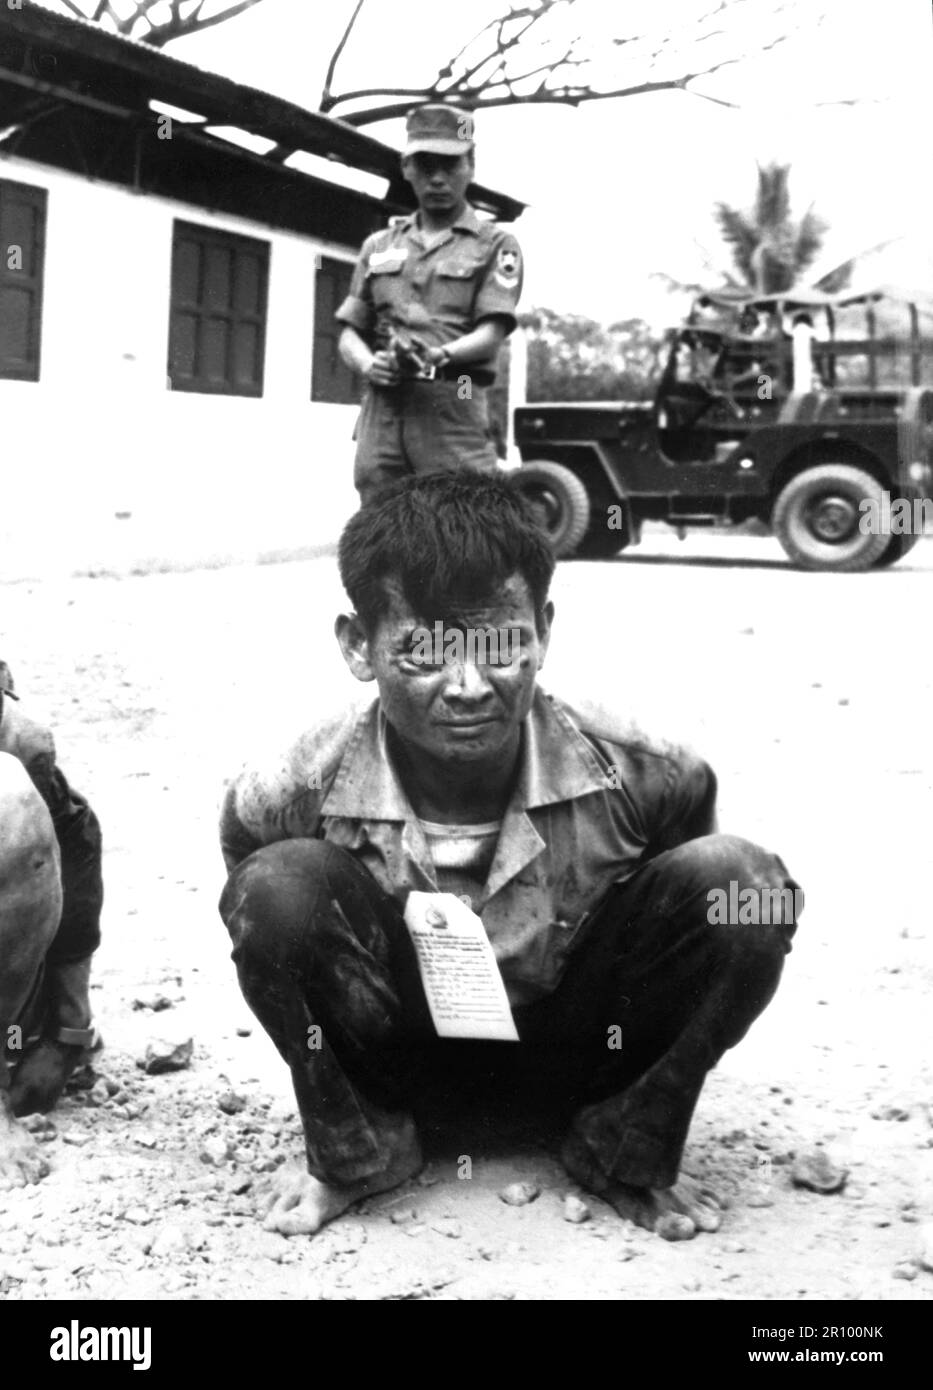 Youthful hard-core Viet Cong, heavily guarded, awaits interrogation following capture in the attacks on the capital city during the festive Tet holiday period.  Circa 1968. Stock Photo